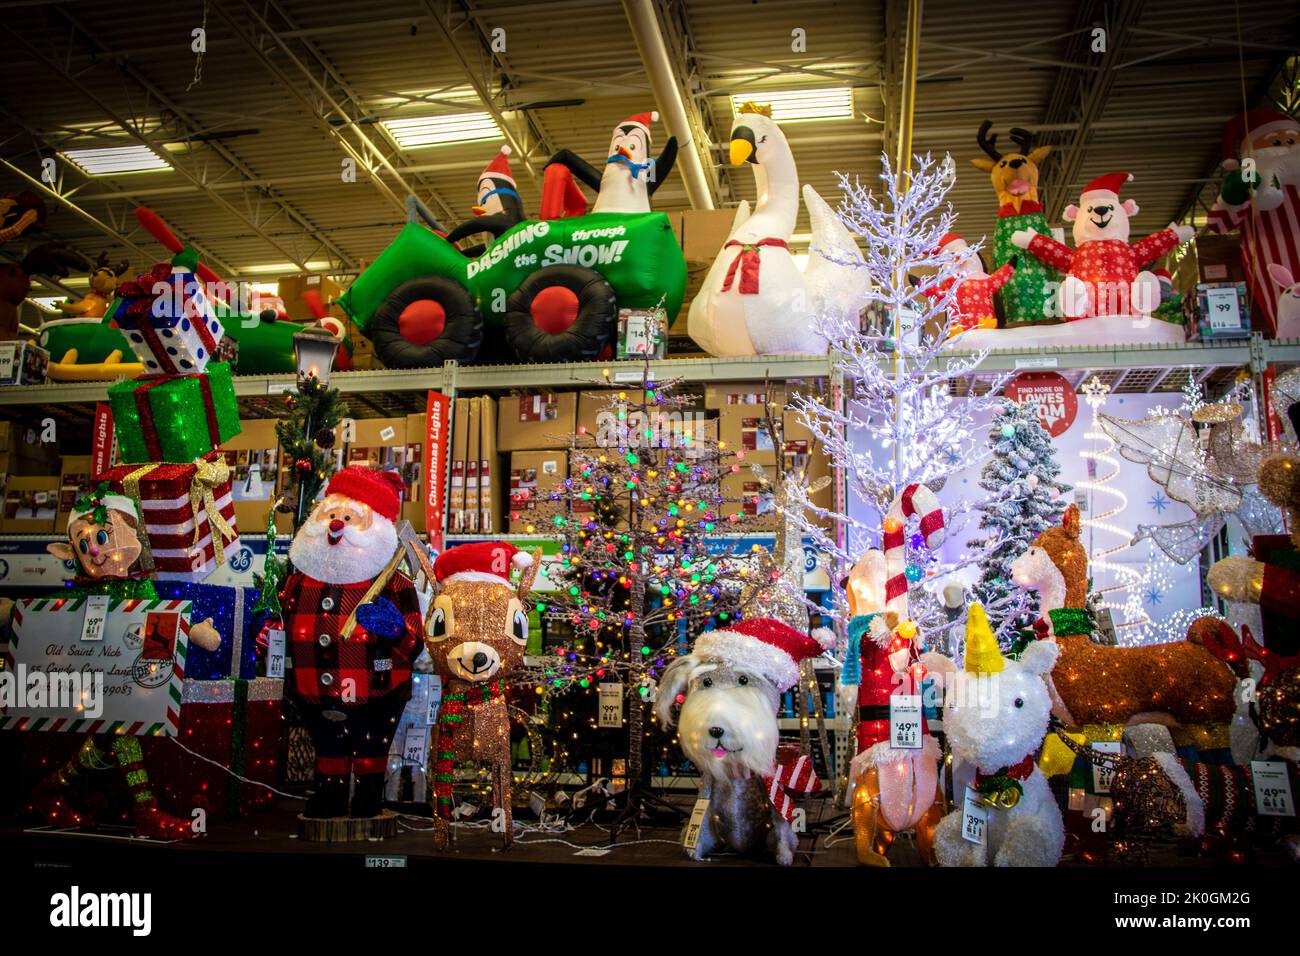 11-3-2019 Tulsa USA Shelves of blow-up outdoor Christmas ornaments with sparkly lights for sale Stock Photo